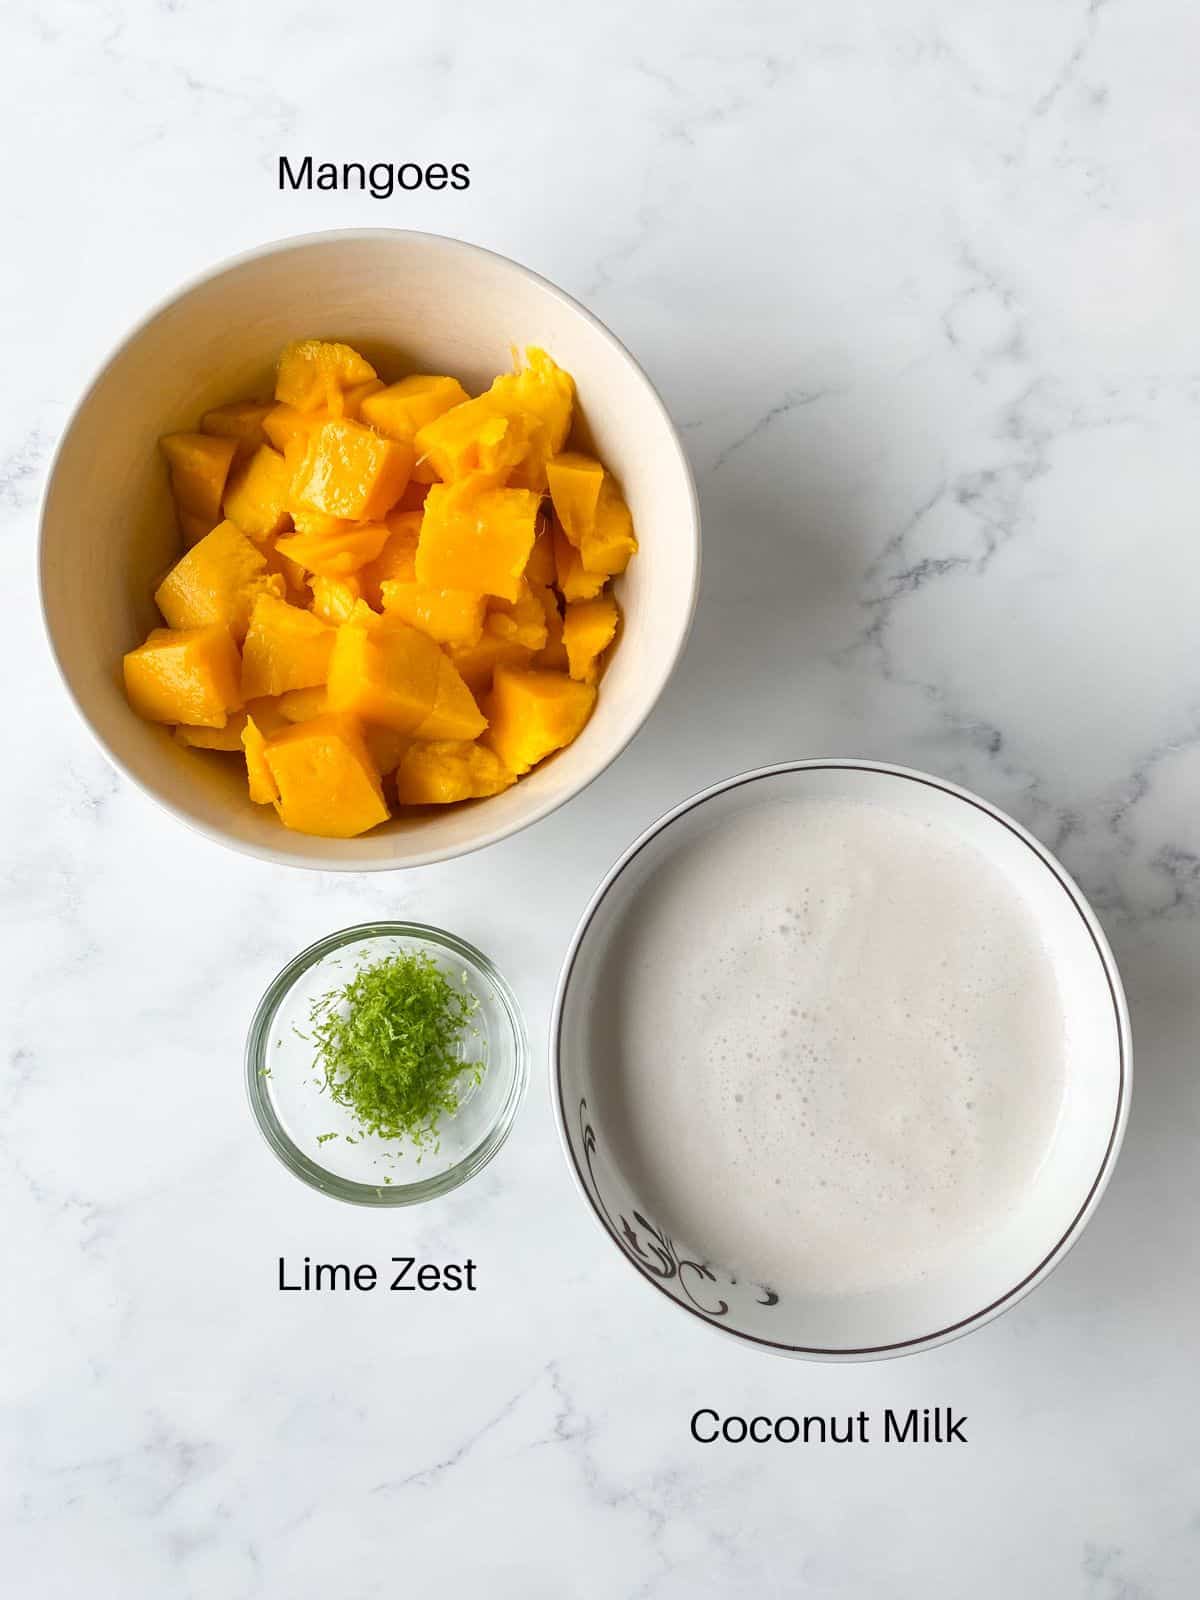 Overhead image of ingredients for mango popsicles